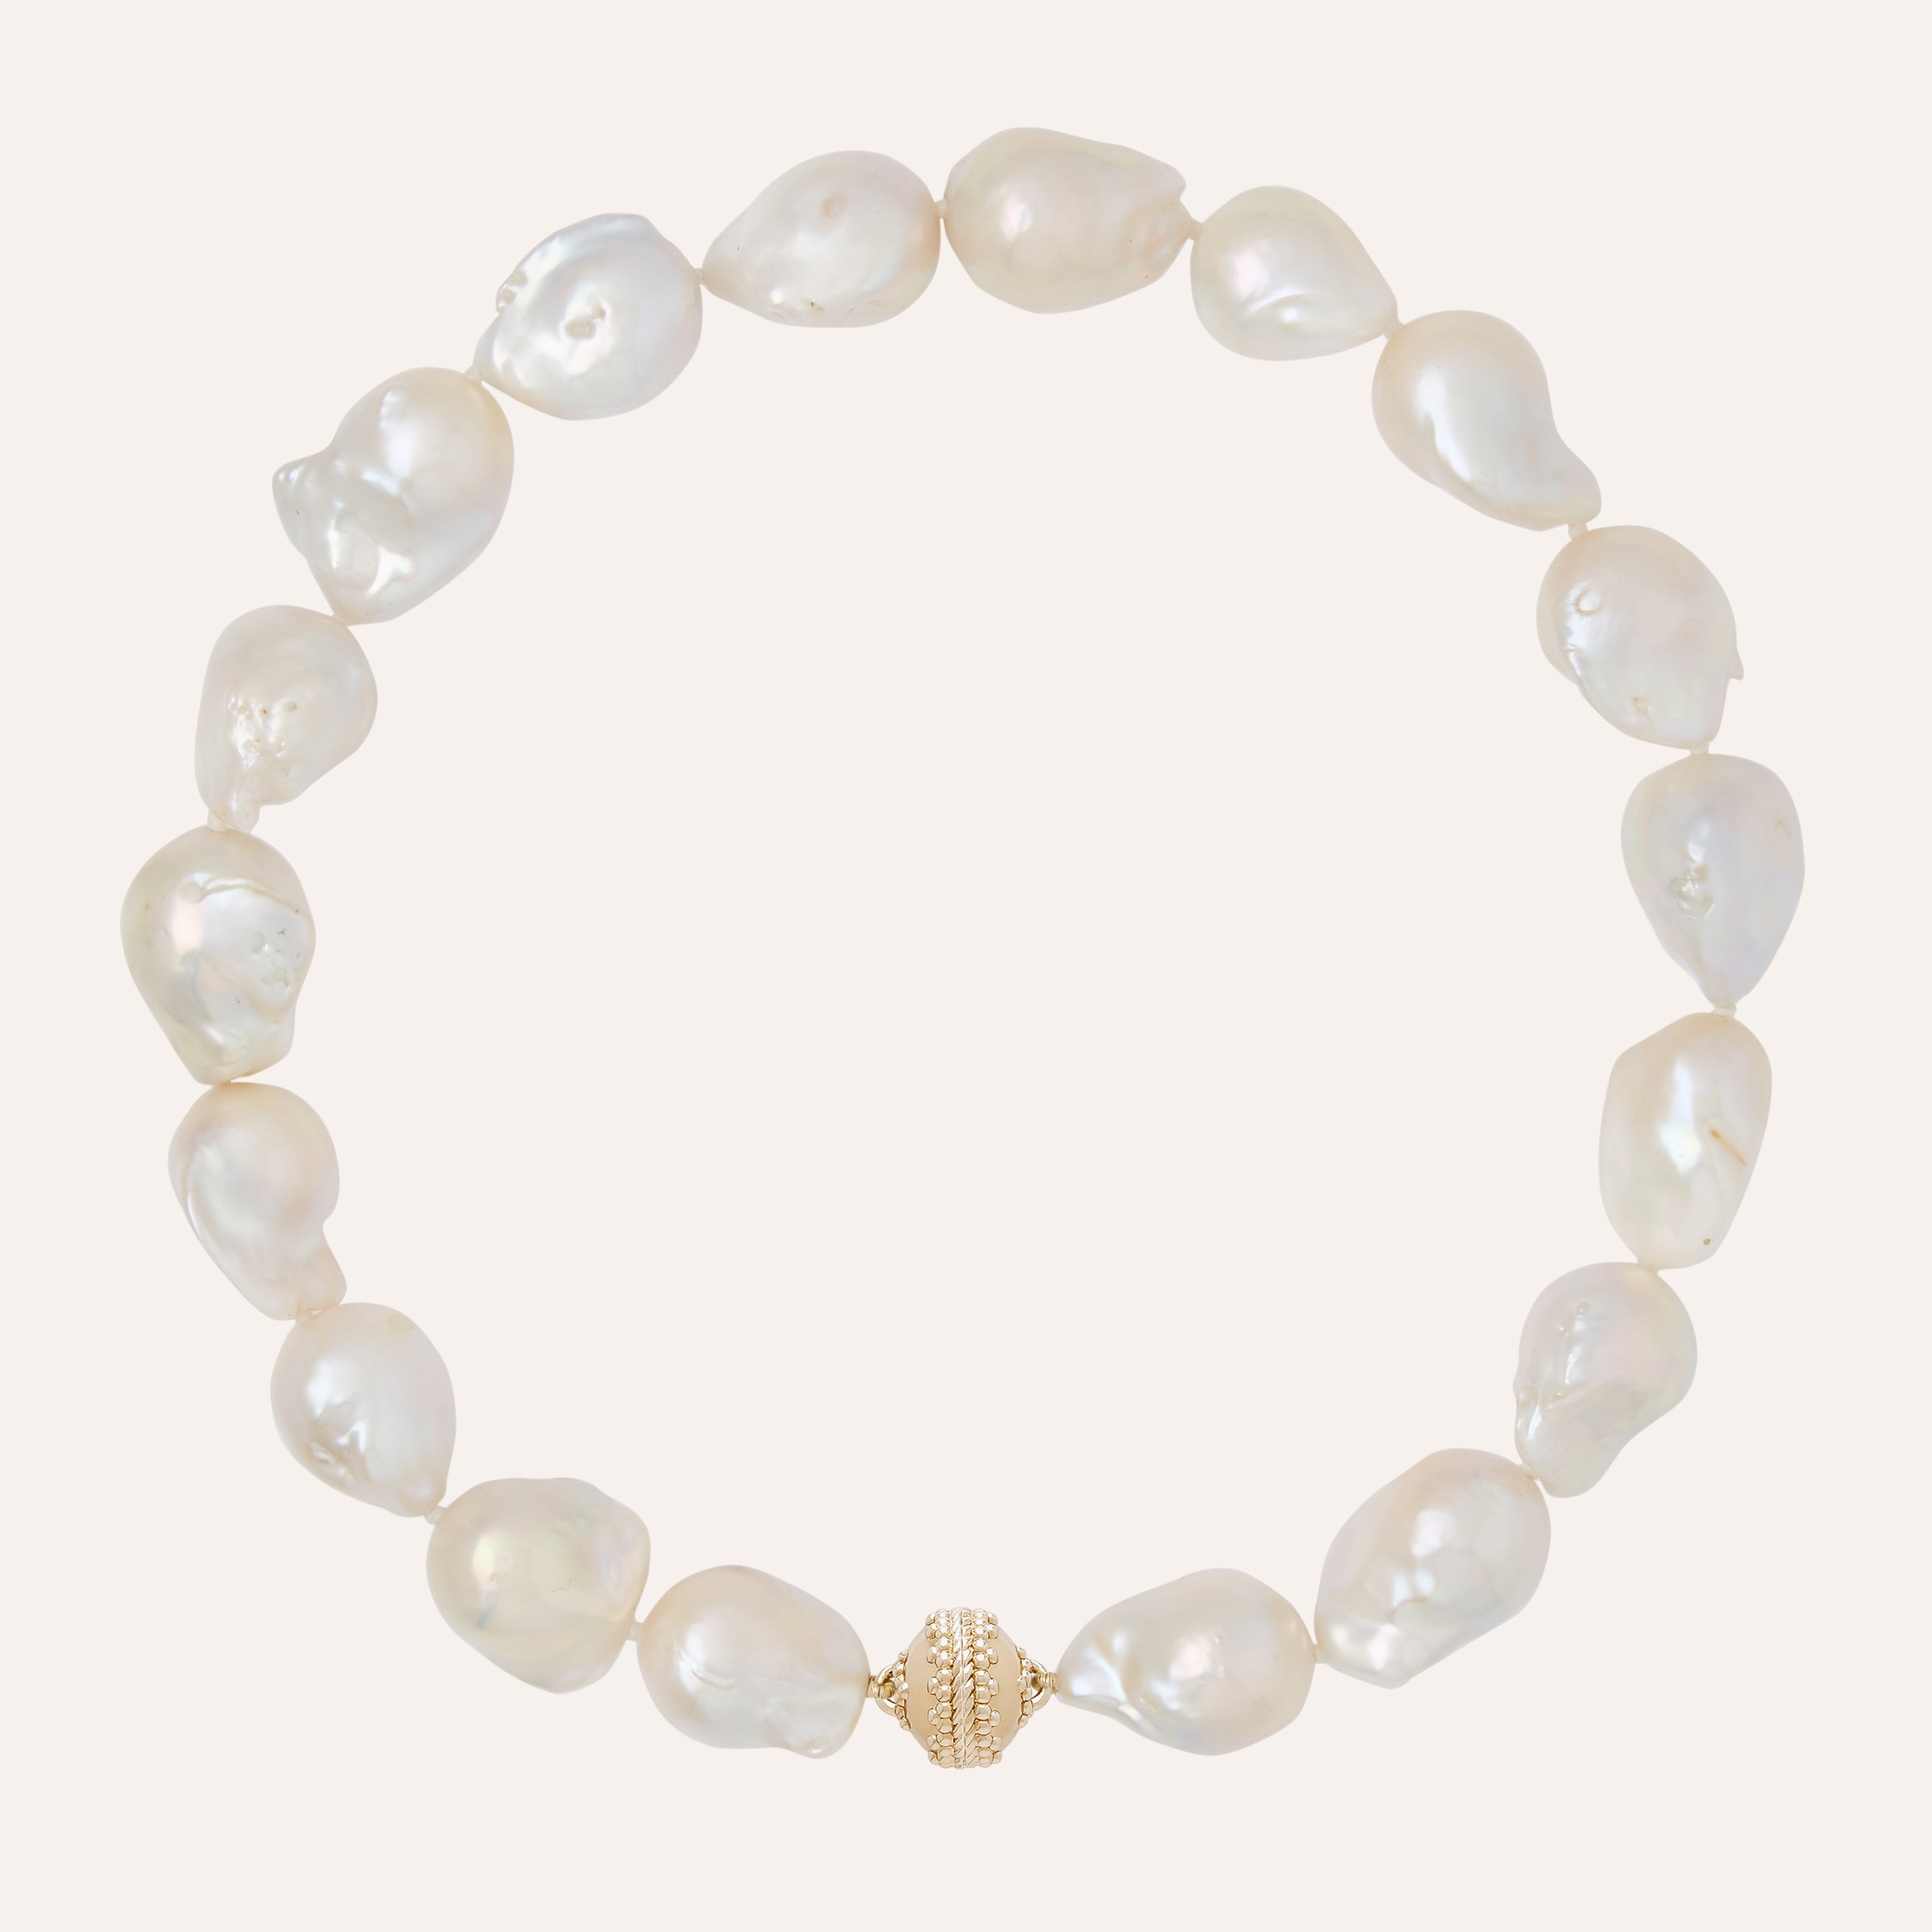 White Freshwater Baroque Pearl 20-25mm Necklace